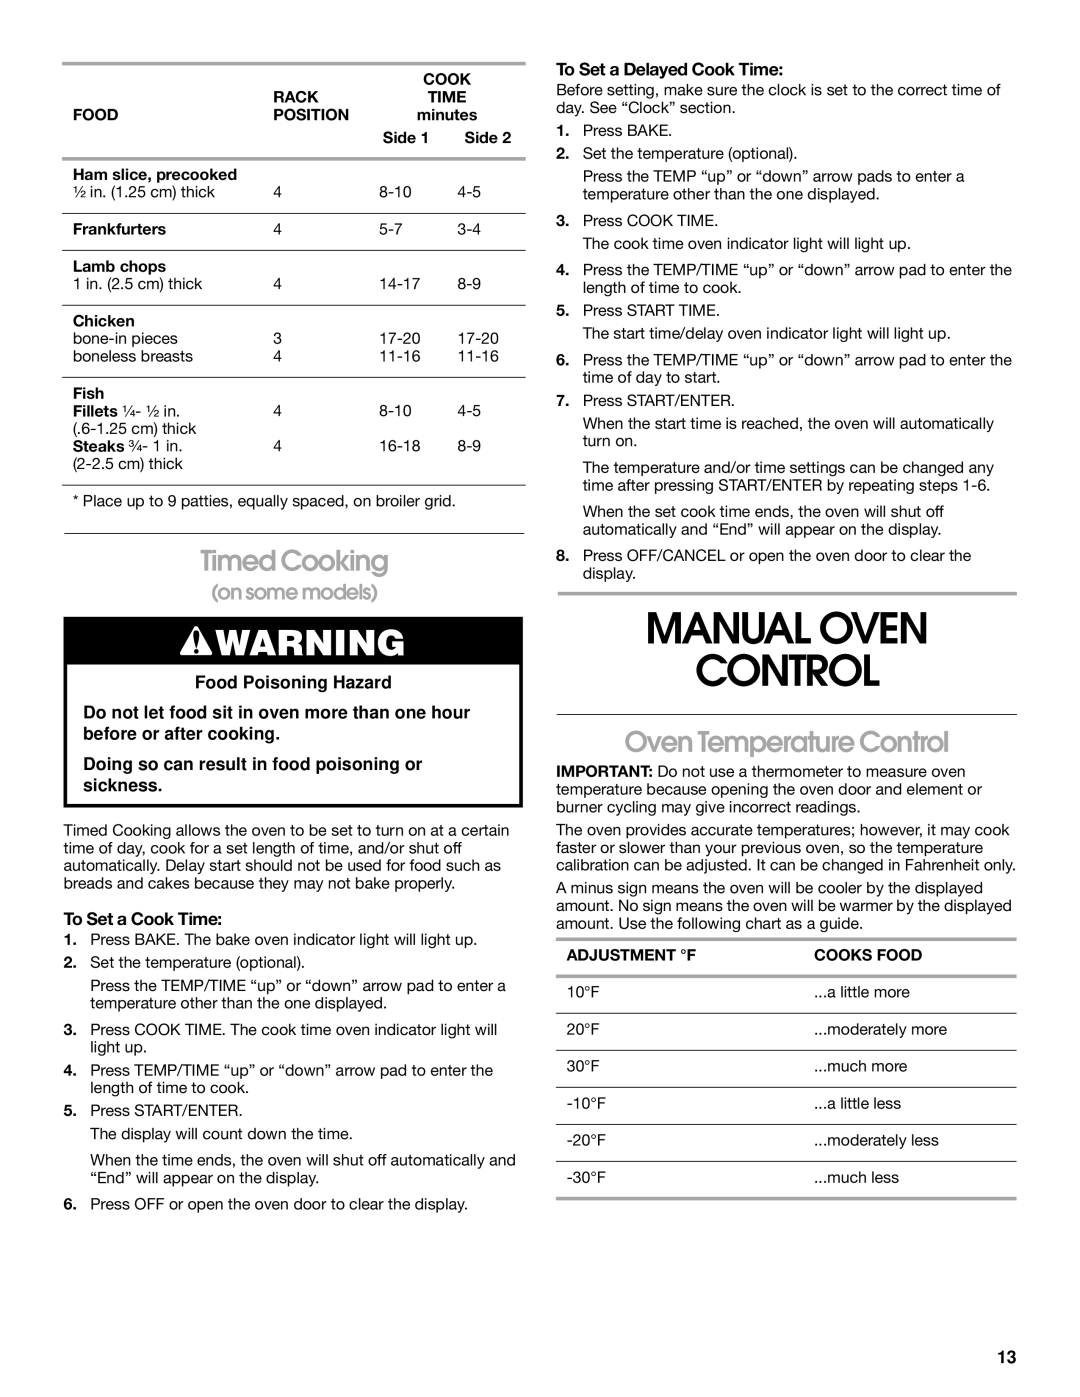 Whirlpool TEP315 manual Manual Oven Control, Timed Cooking, Food Poisoning Hazard, Oven Temperature Control, on some models 